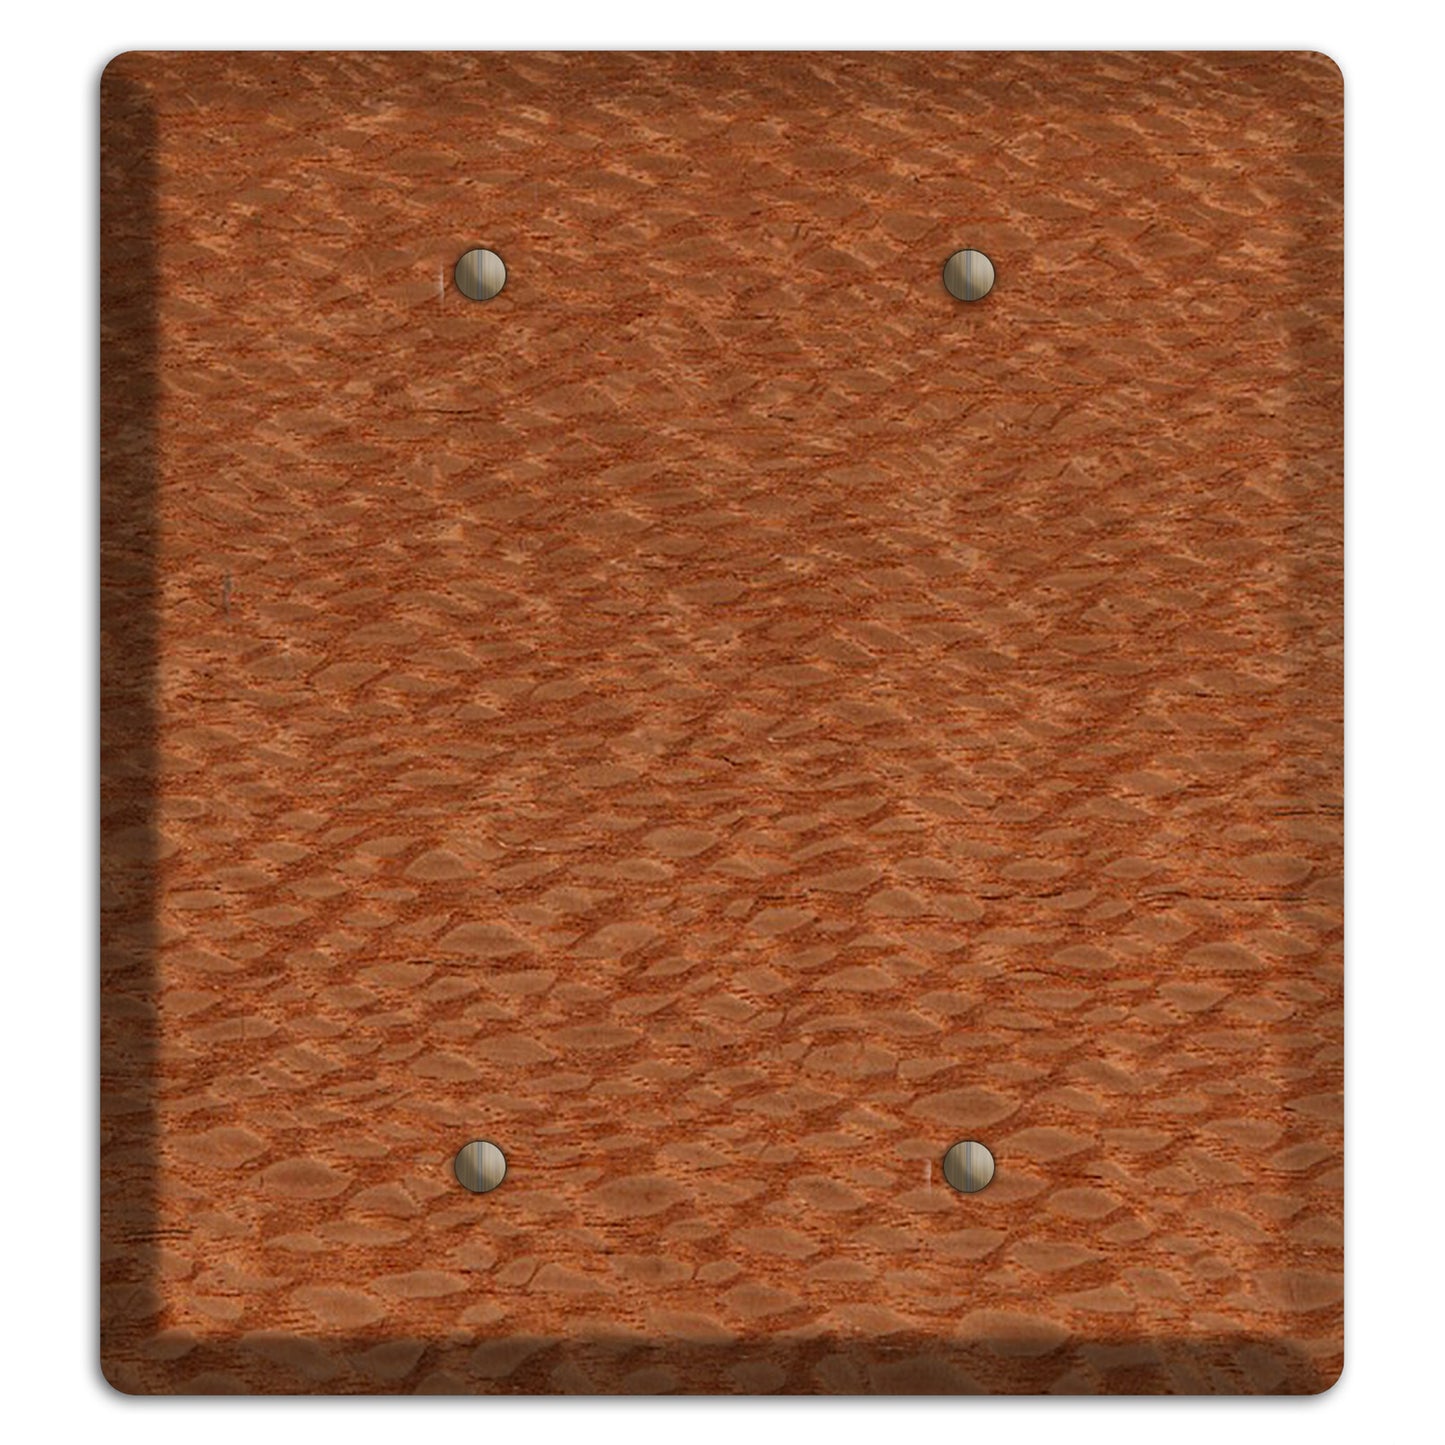 Lacewood Wood Double Blank Cover Plate